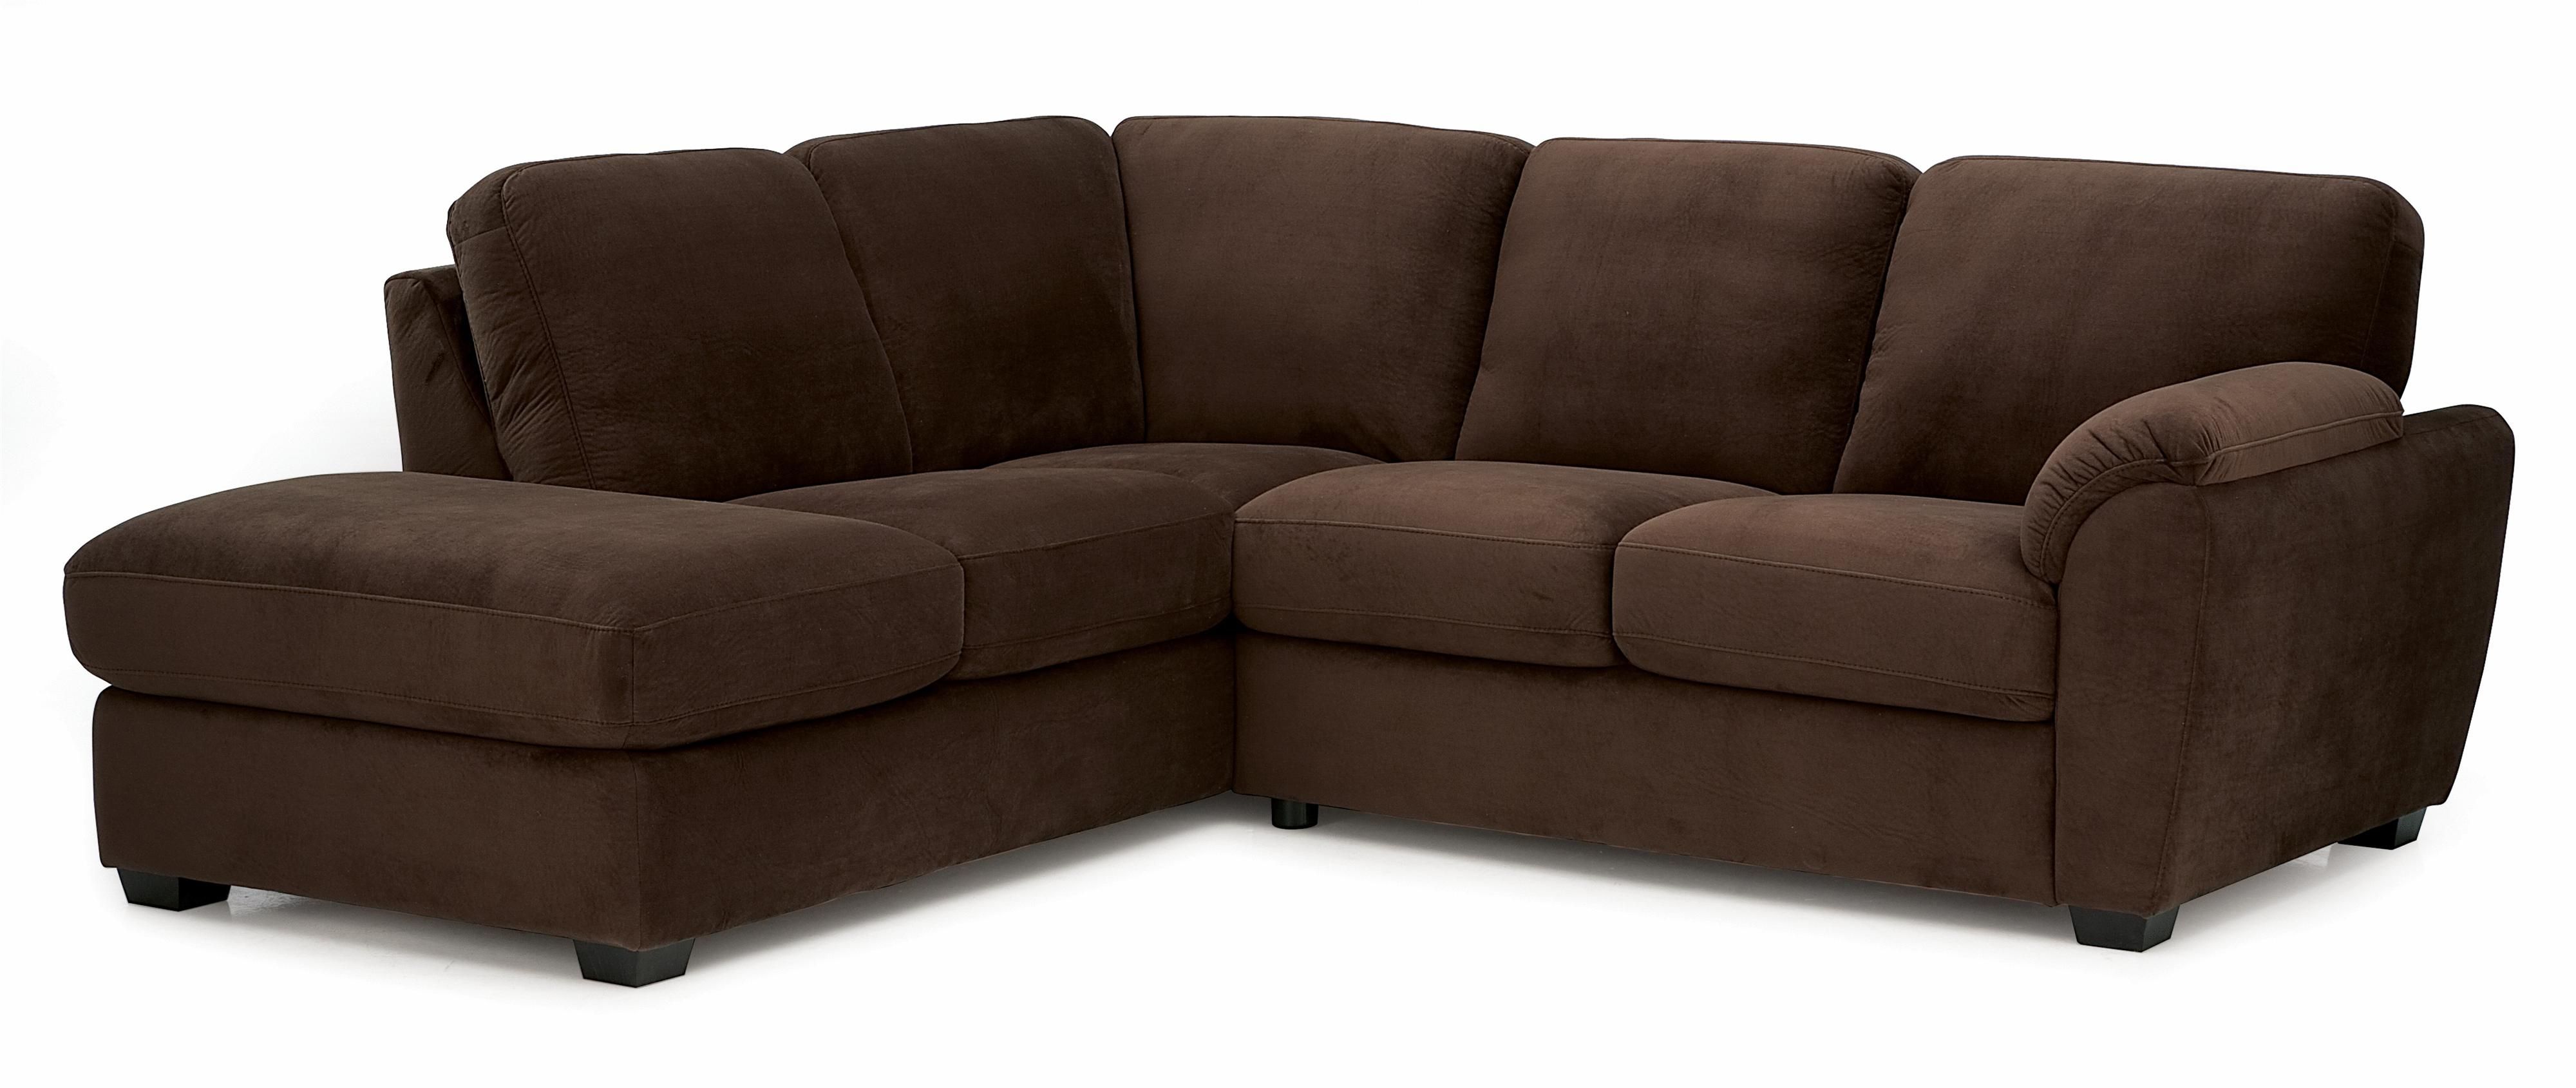 Lanza Two Piece Sectional Sofa With Rhf Chaisepalliser | Sofas With Regard To Newmarket Ontario Sectional Sofas (View 6 of 10)